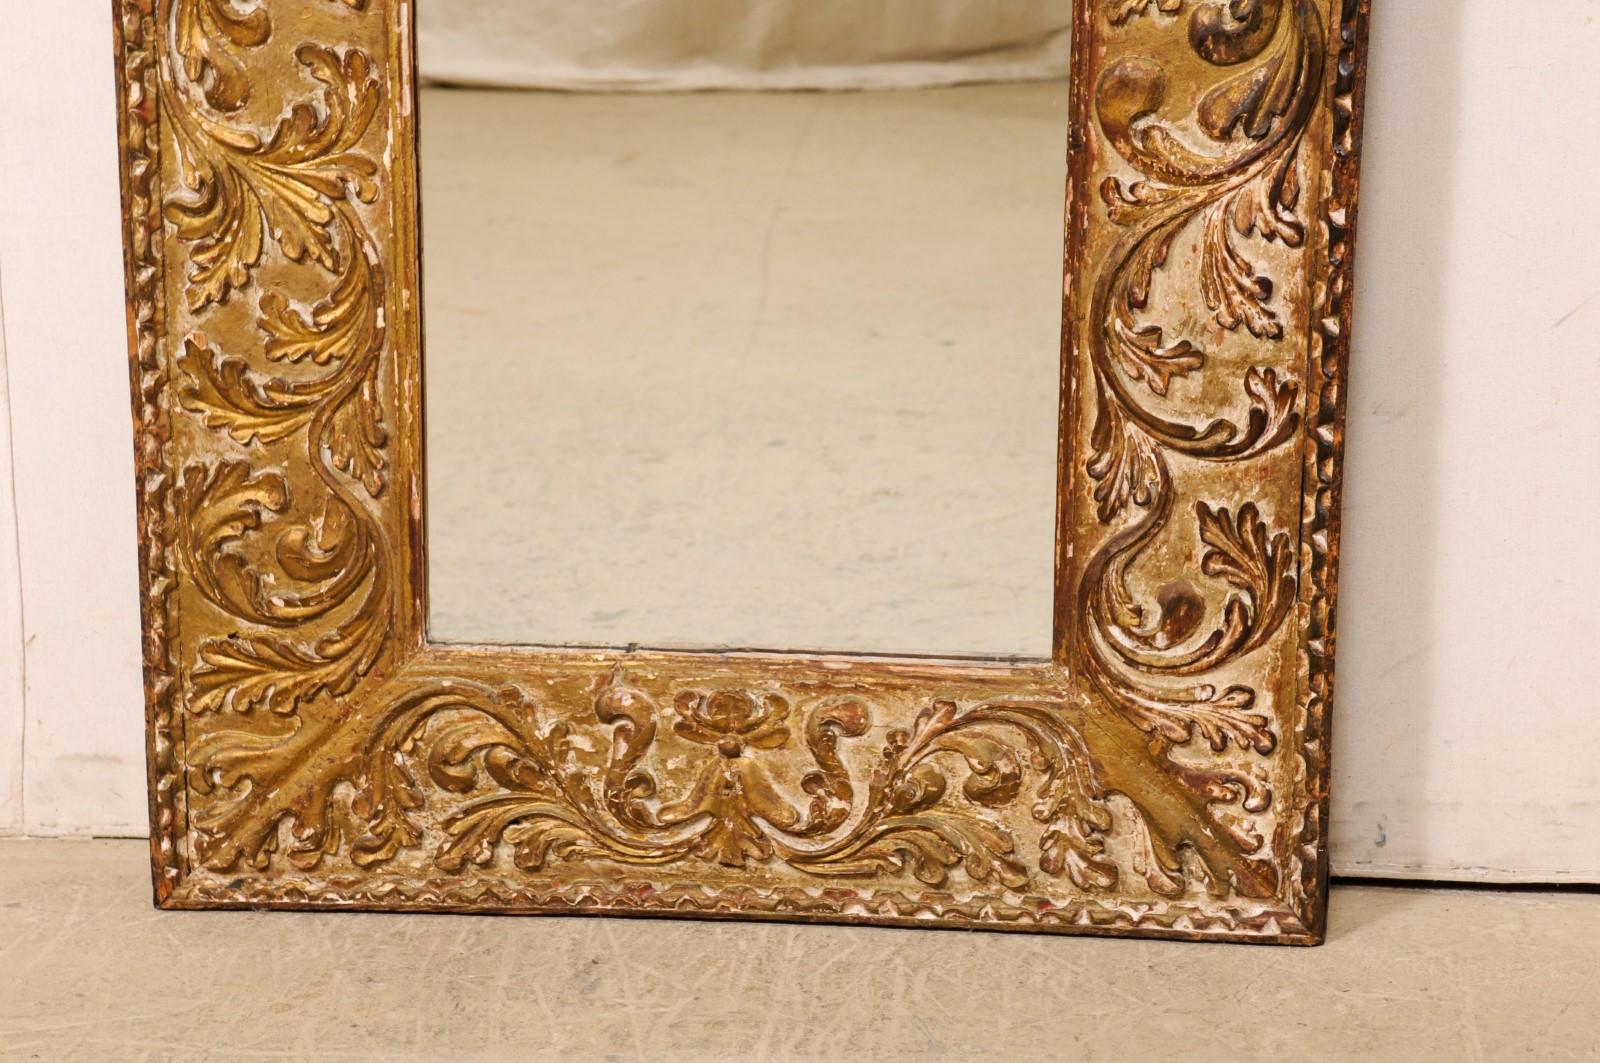 Fabulous Italian Period Baroque Tall Mirror W/Thick Leaf-Carved Frame In Good Condition For Sale In Atlanta, GA